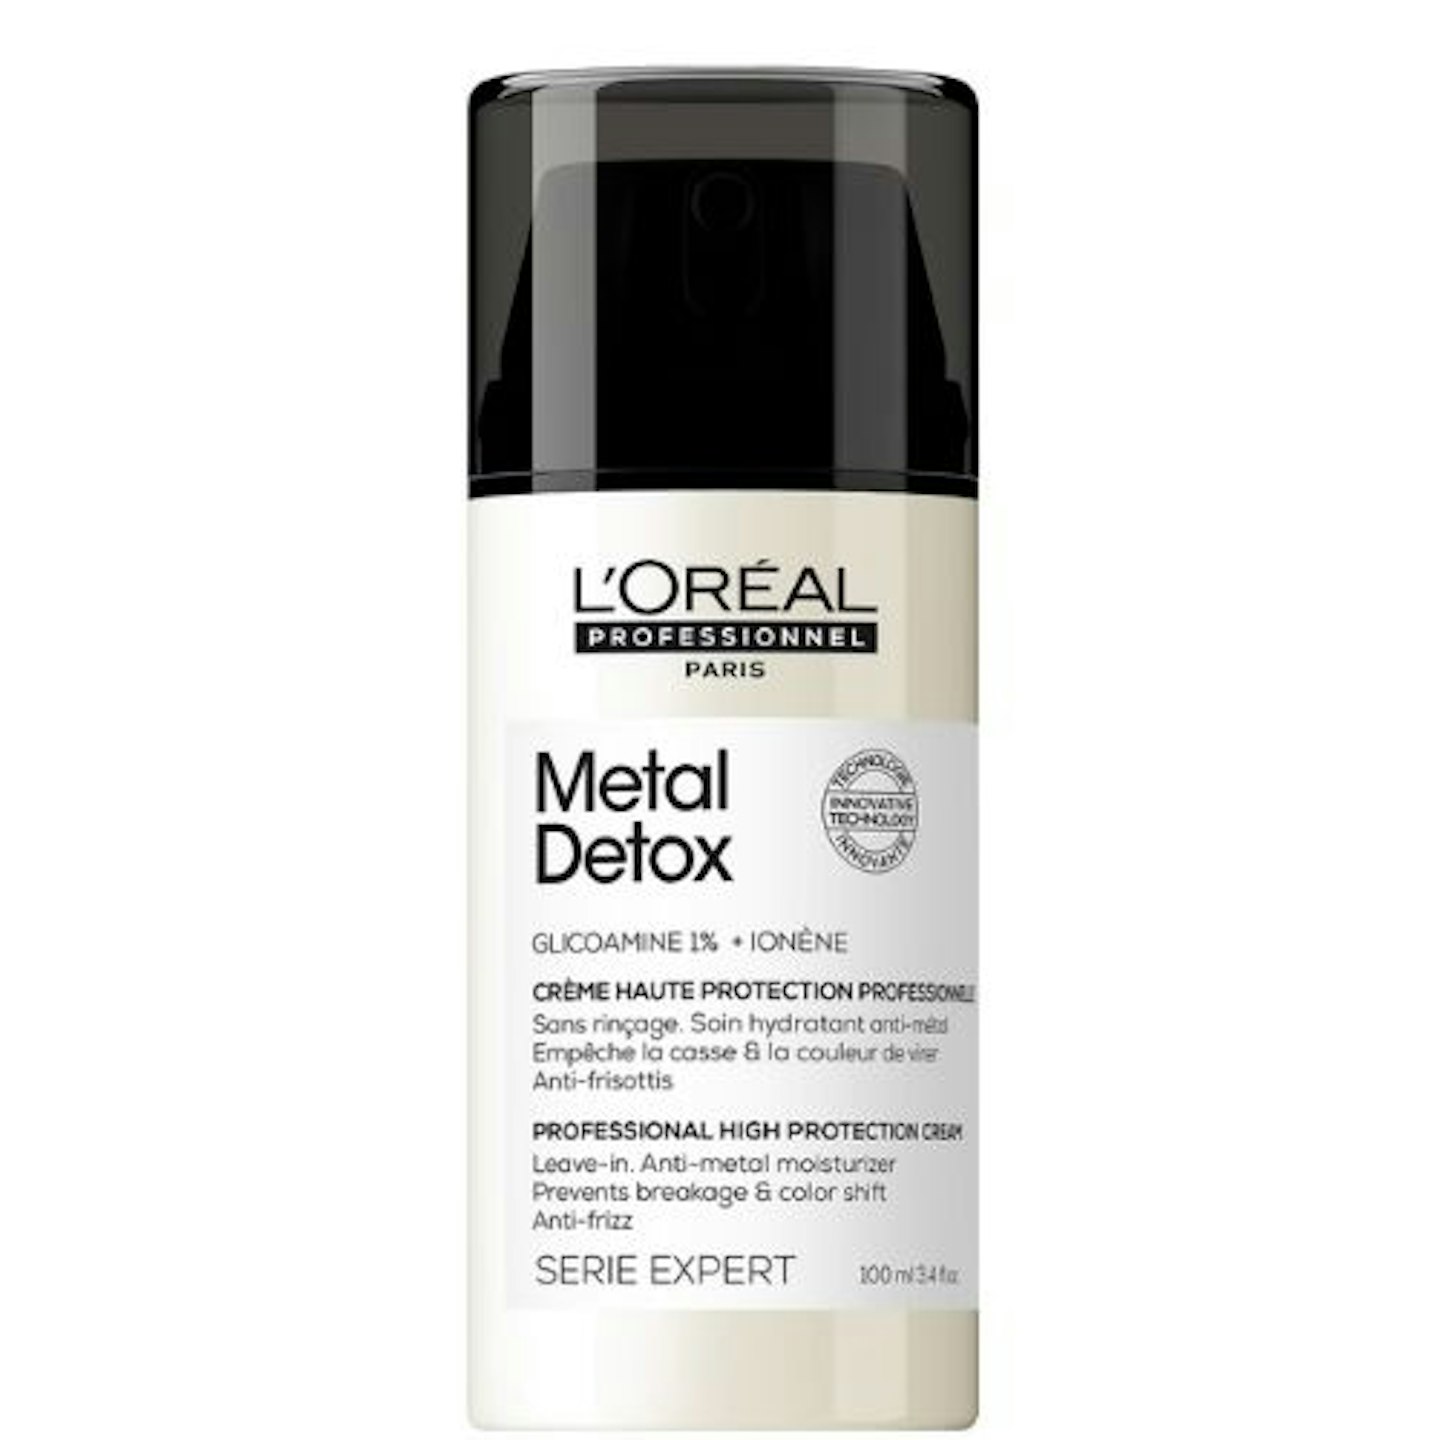 L'Oréal Professional Metal Detox High Protection Leave-in Cream